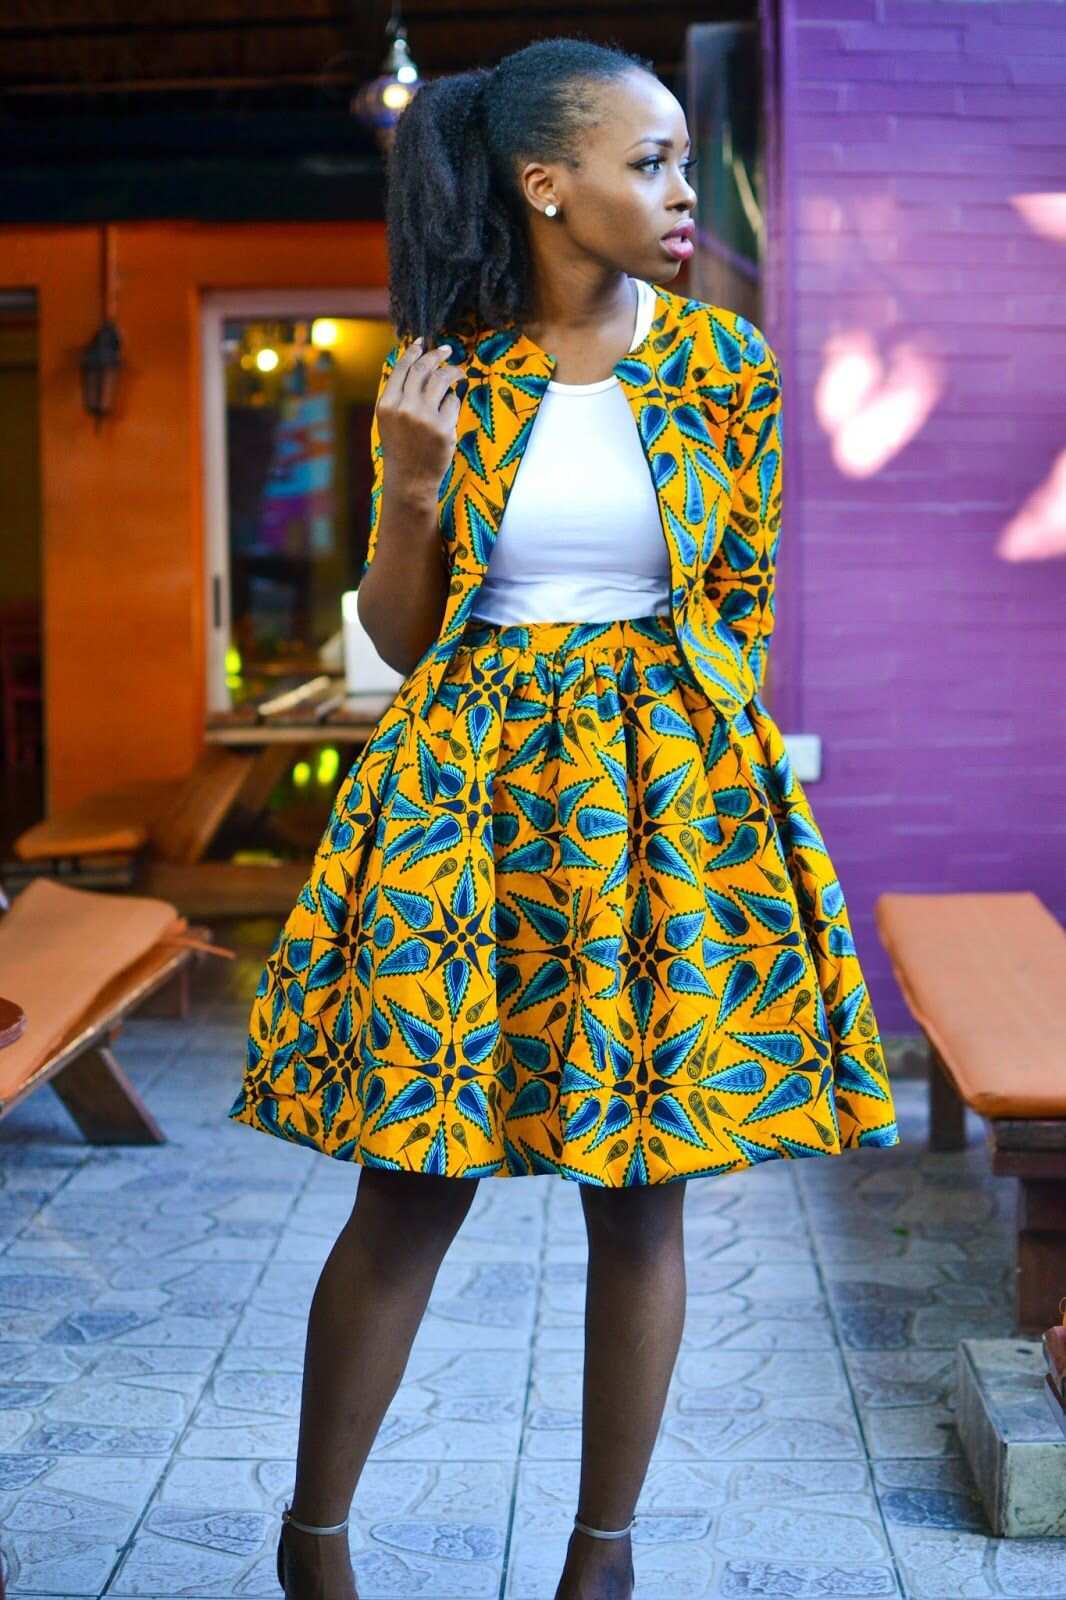 For Ladies See Stylish and Best Ankara Skirt and Blouse Designs  Reny  styles